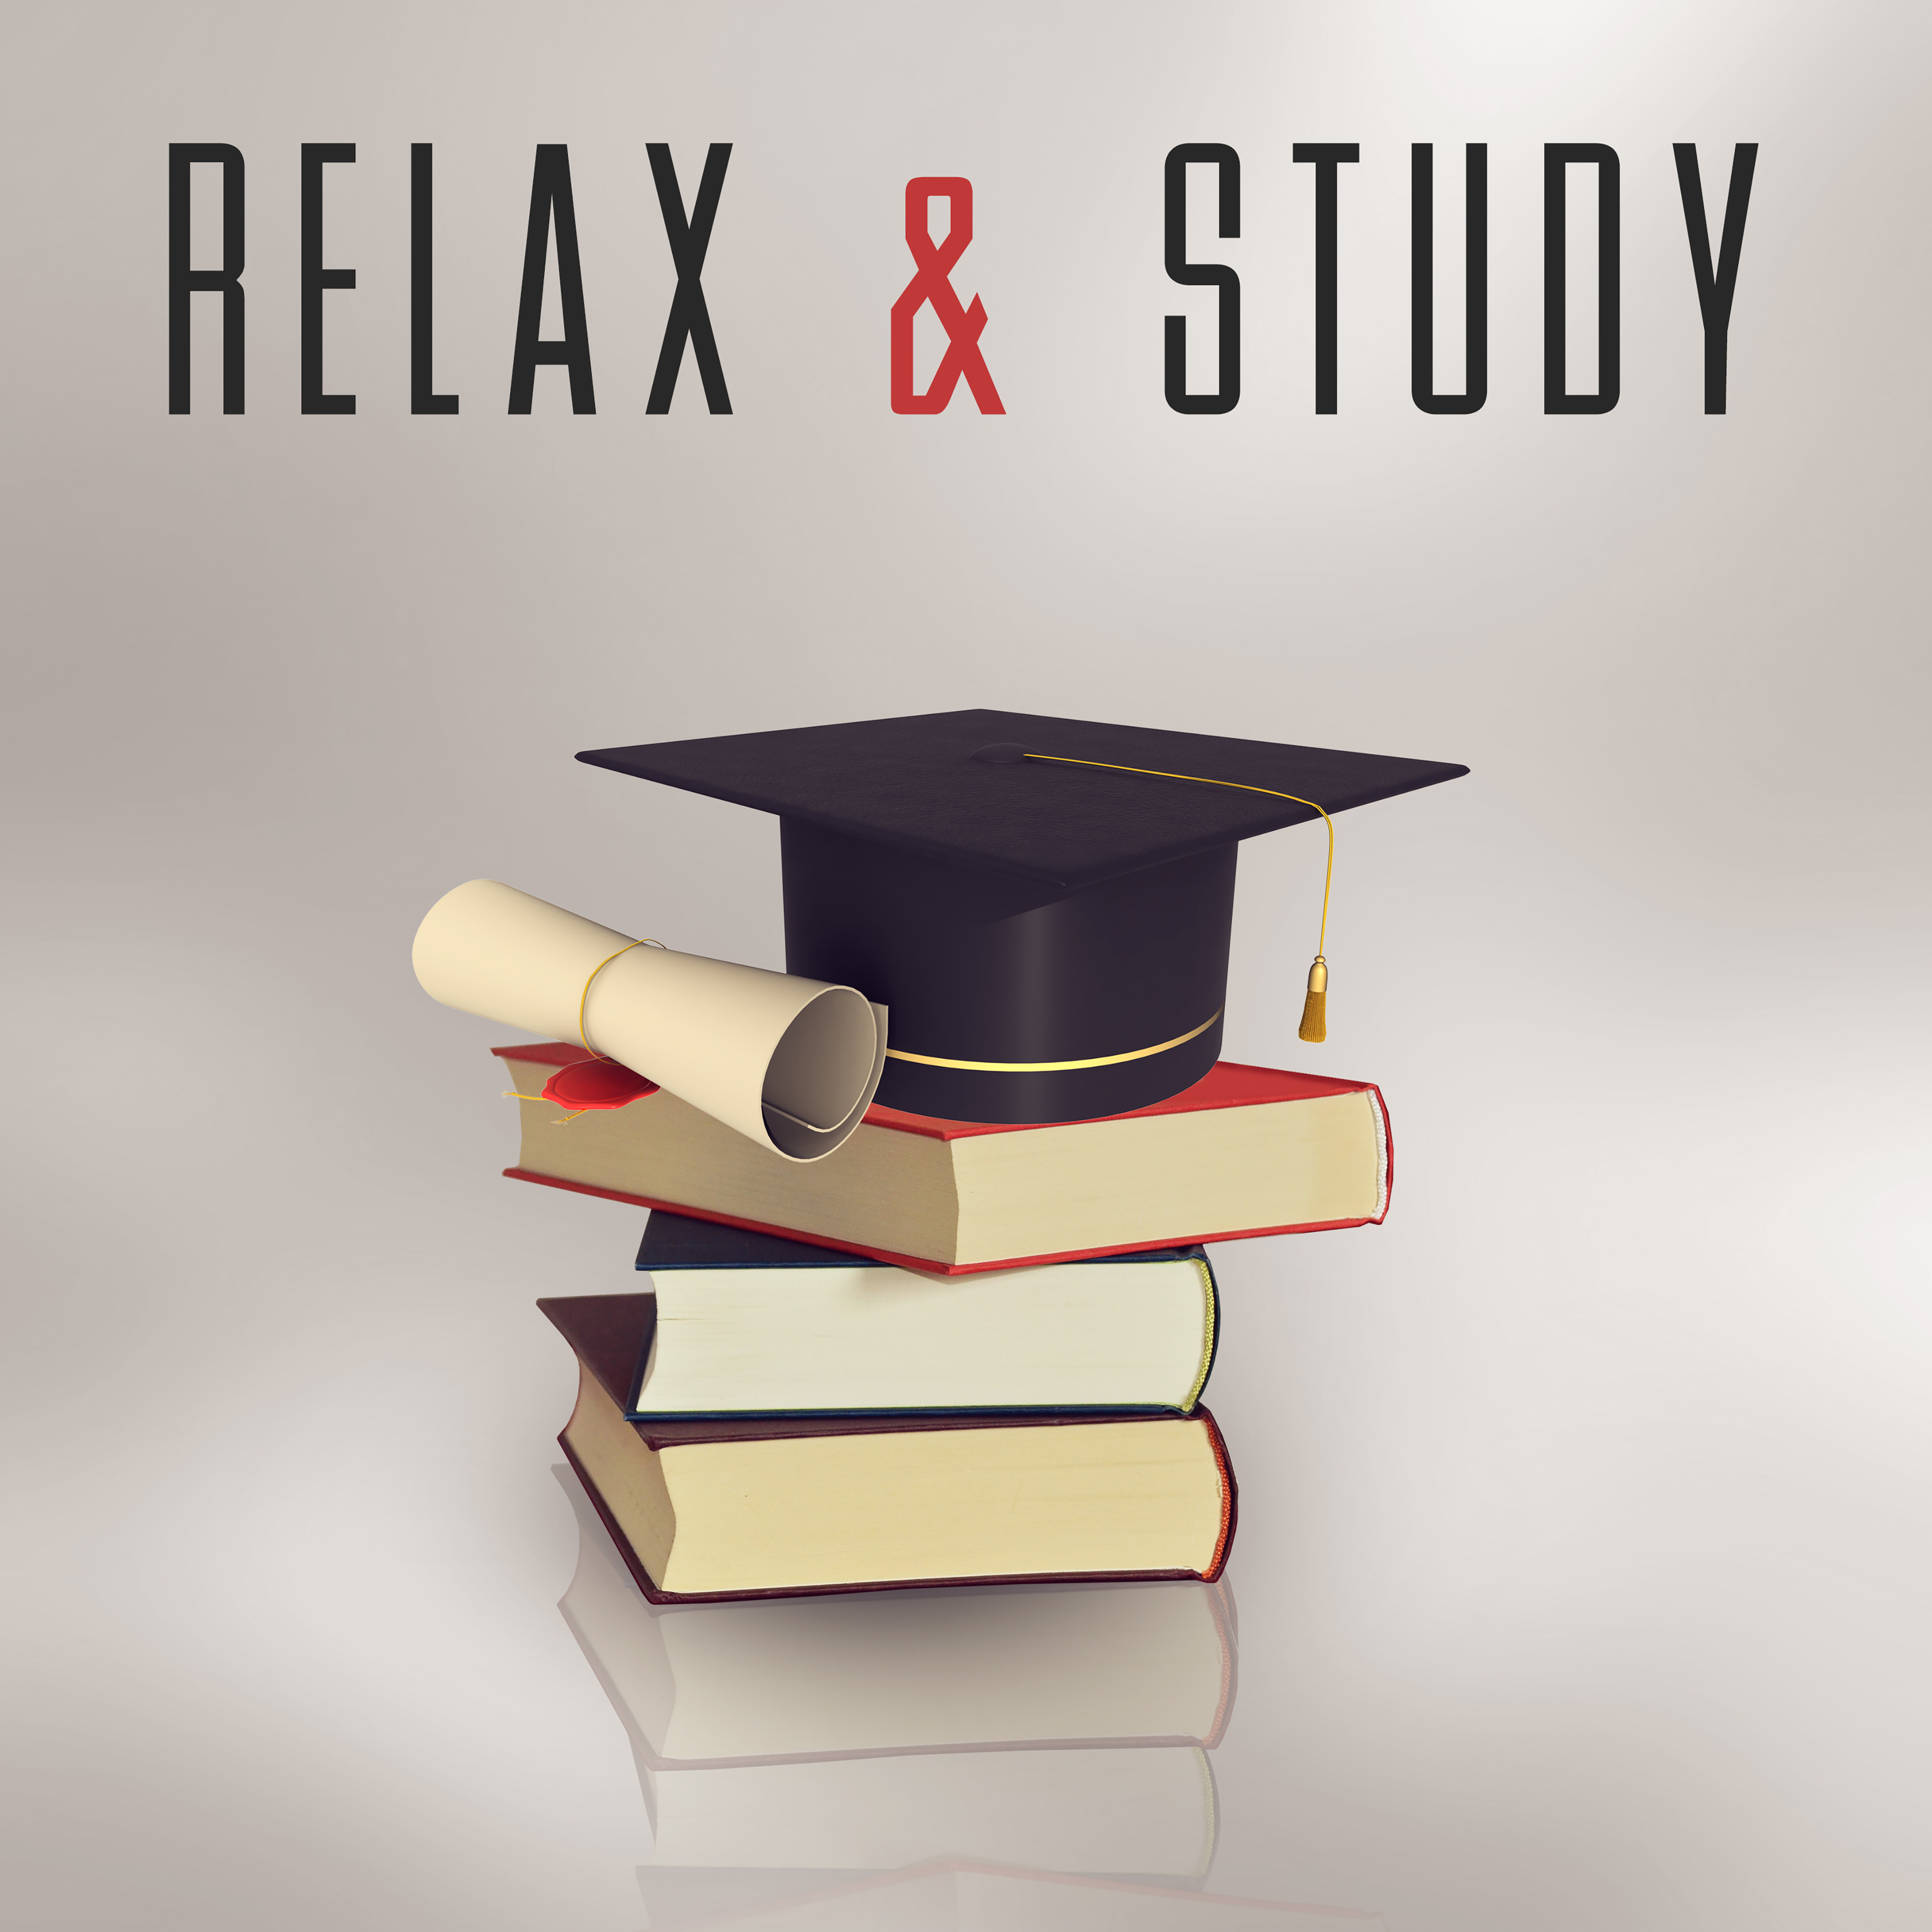 Relax & Study – Relaxing Music for Learning, Study Music, Nature Sounds, Keep Focus, Learn Faster